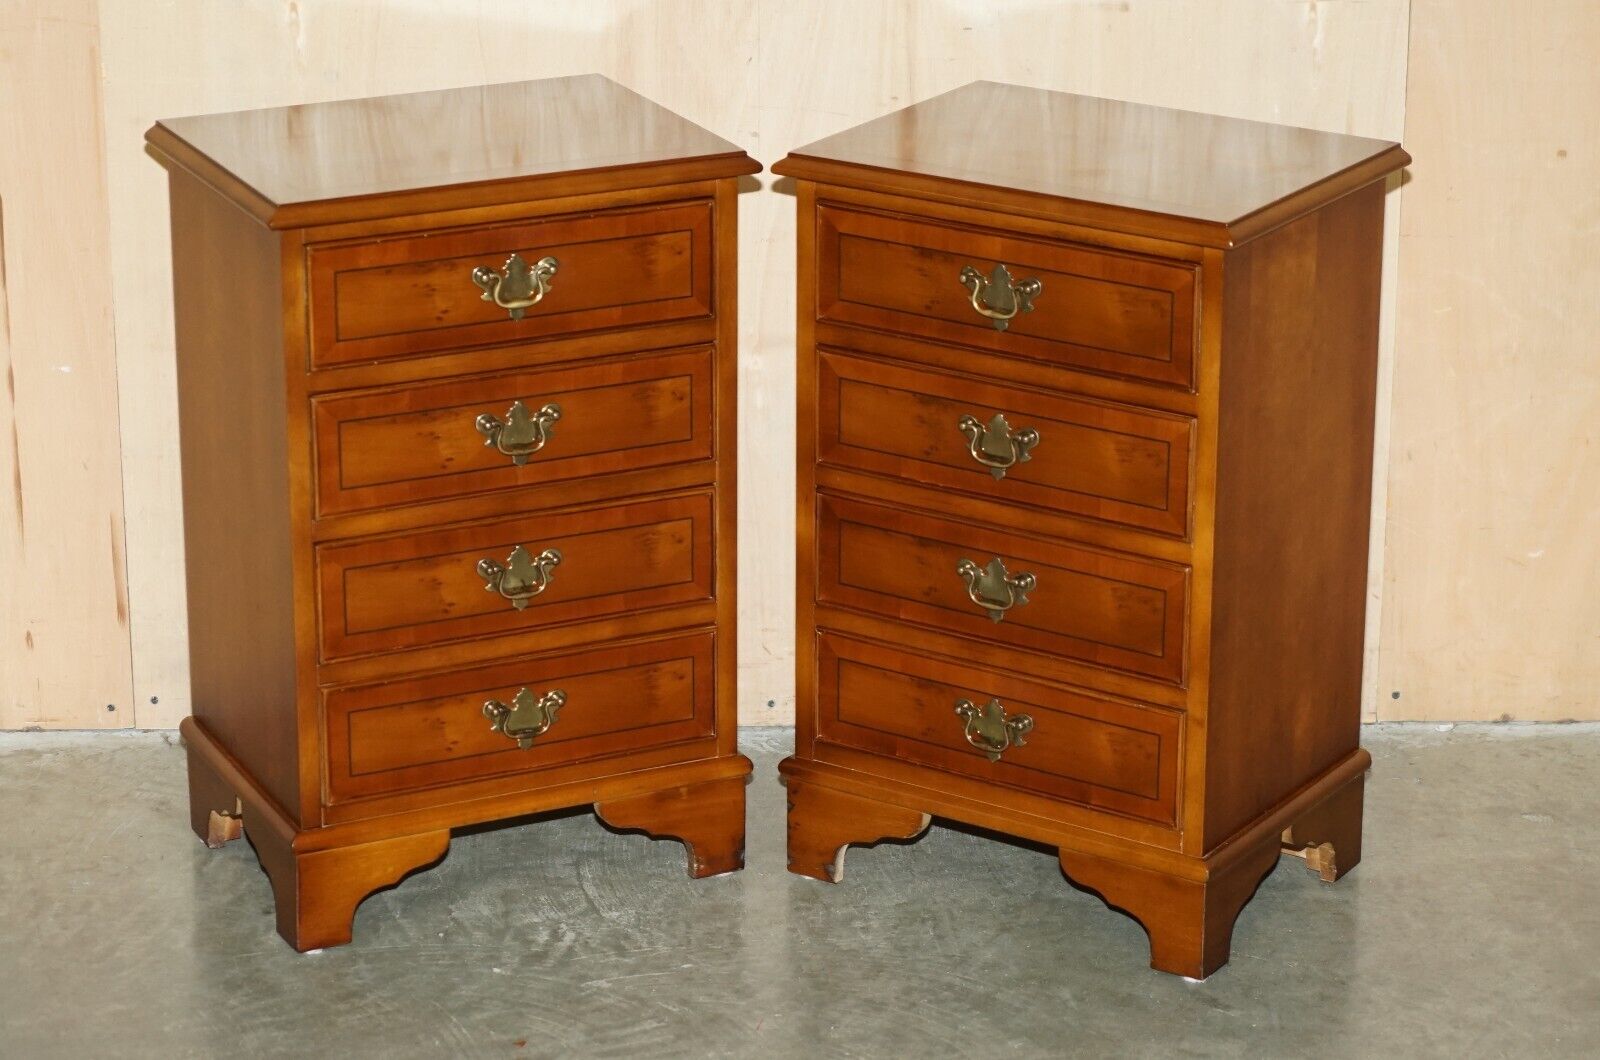 VINTAGE PAIR OF BURR WALNUT NIGHTSTAND BEDSIDE TABLE DRAWERS PART OF A SUITE